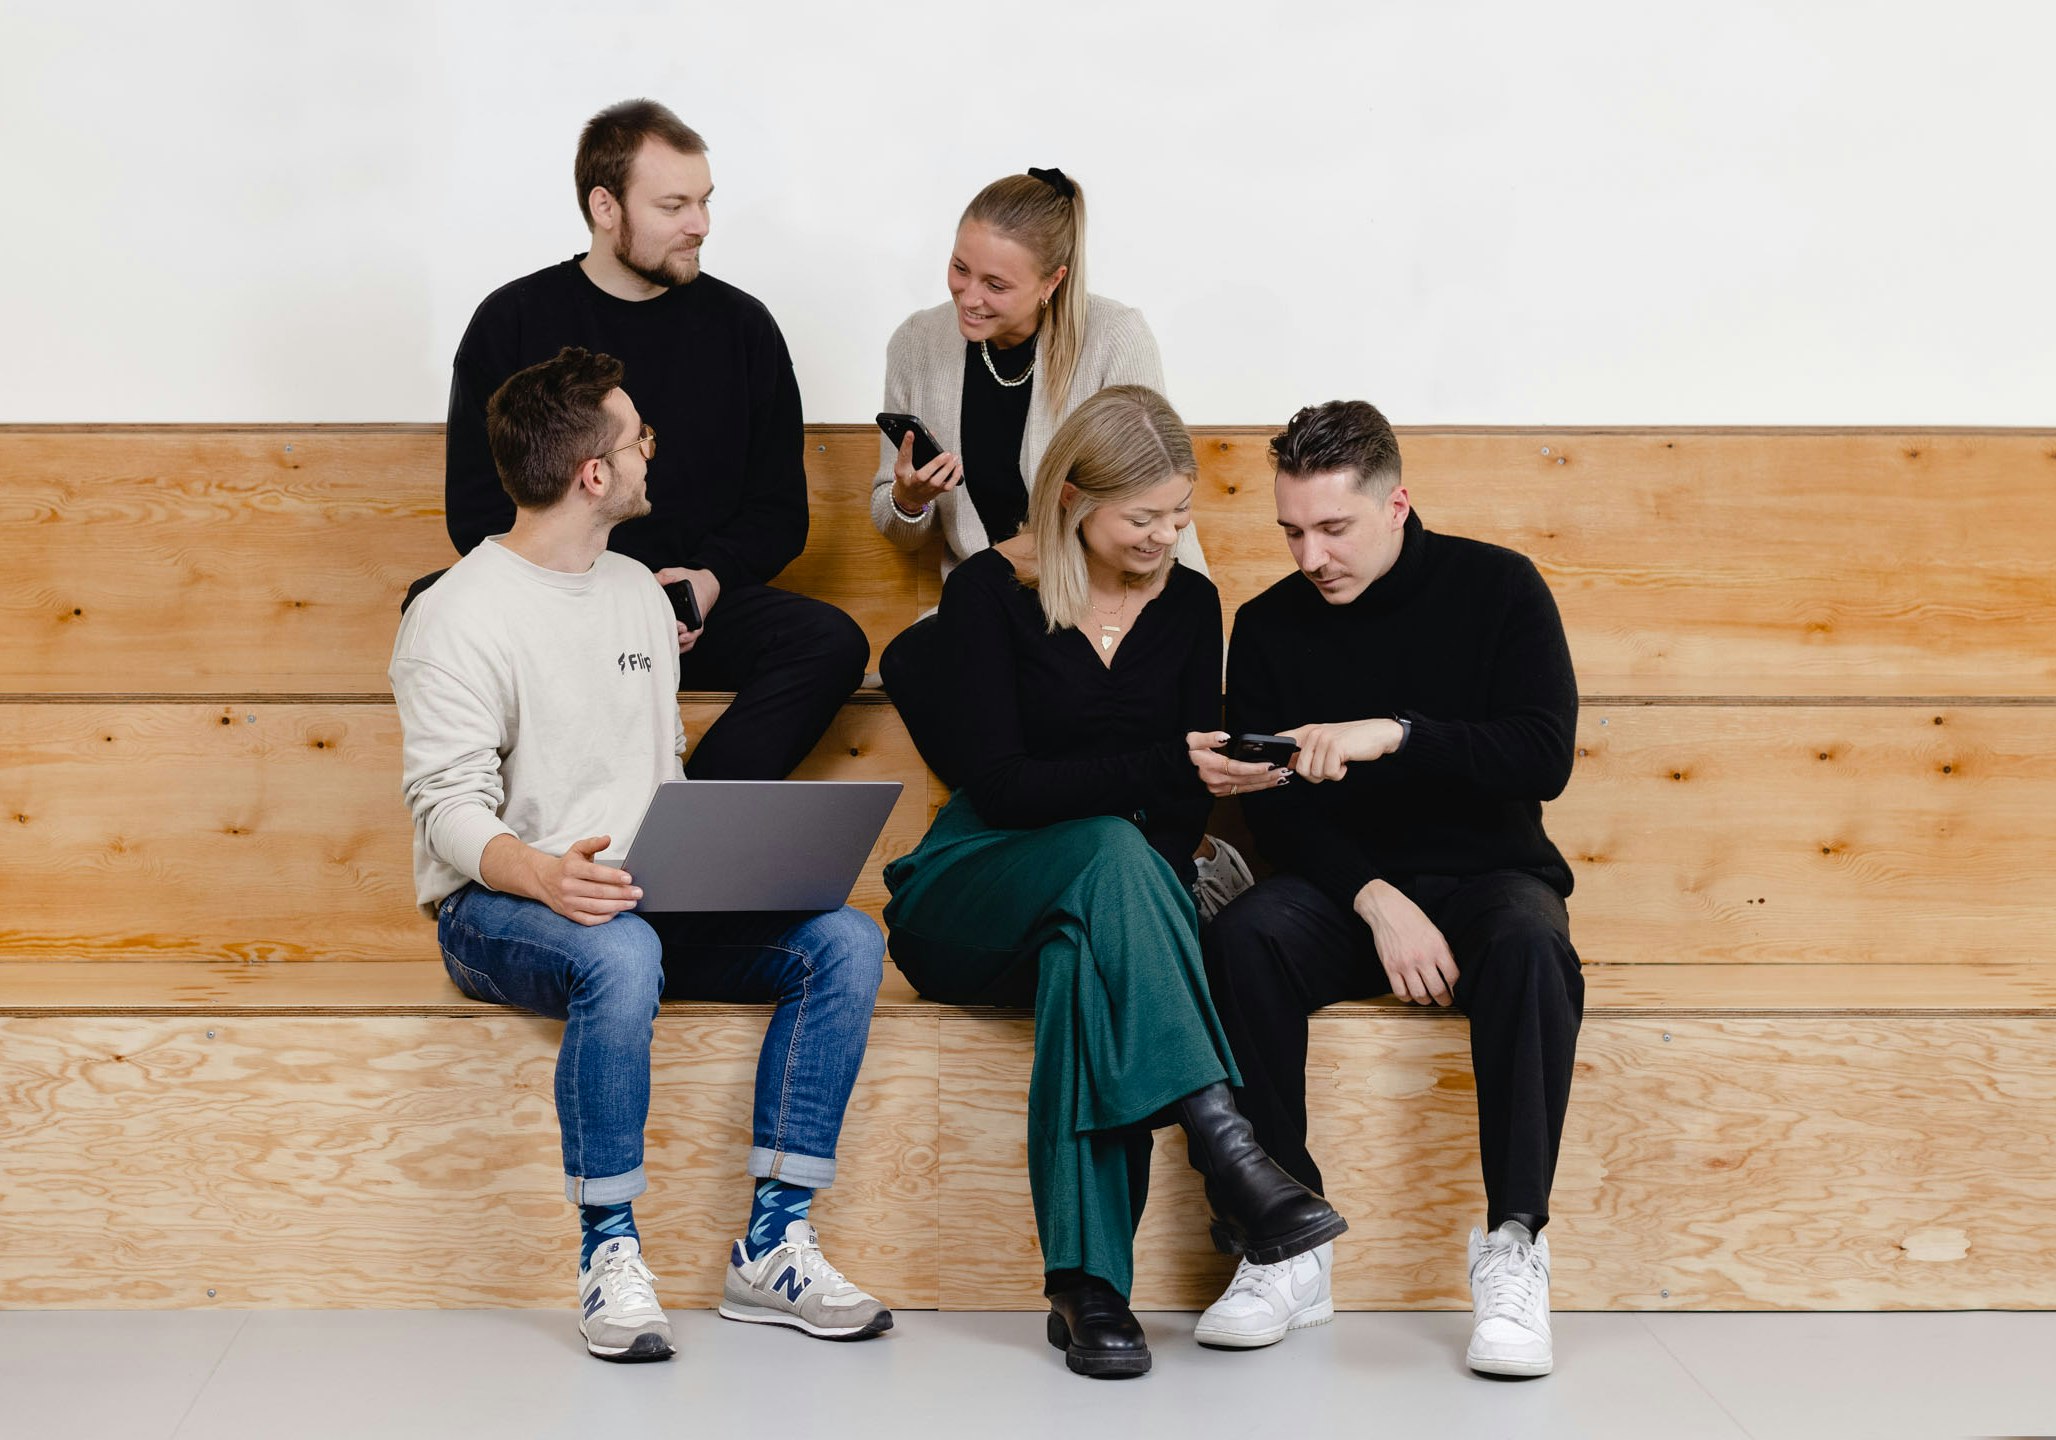 Five people are sitting on wooden stairs and using mobile devices